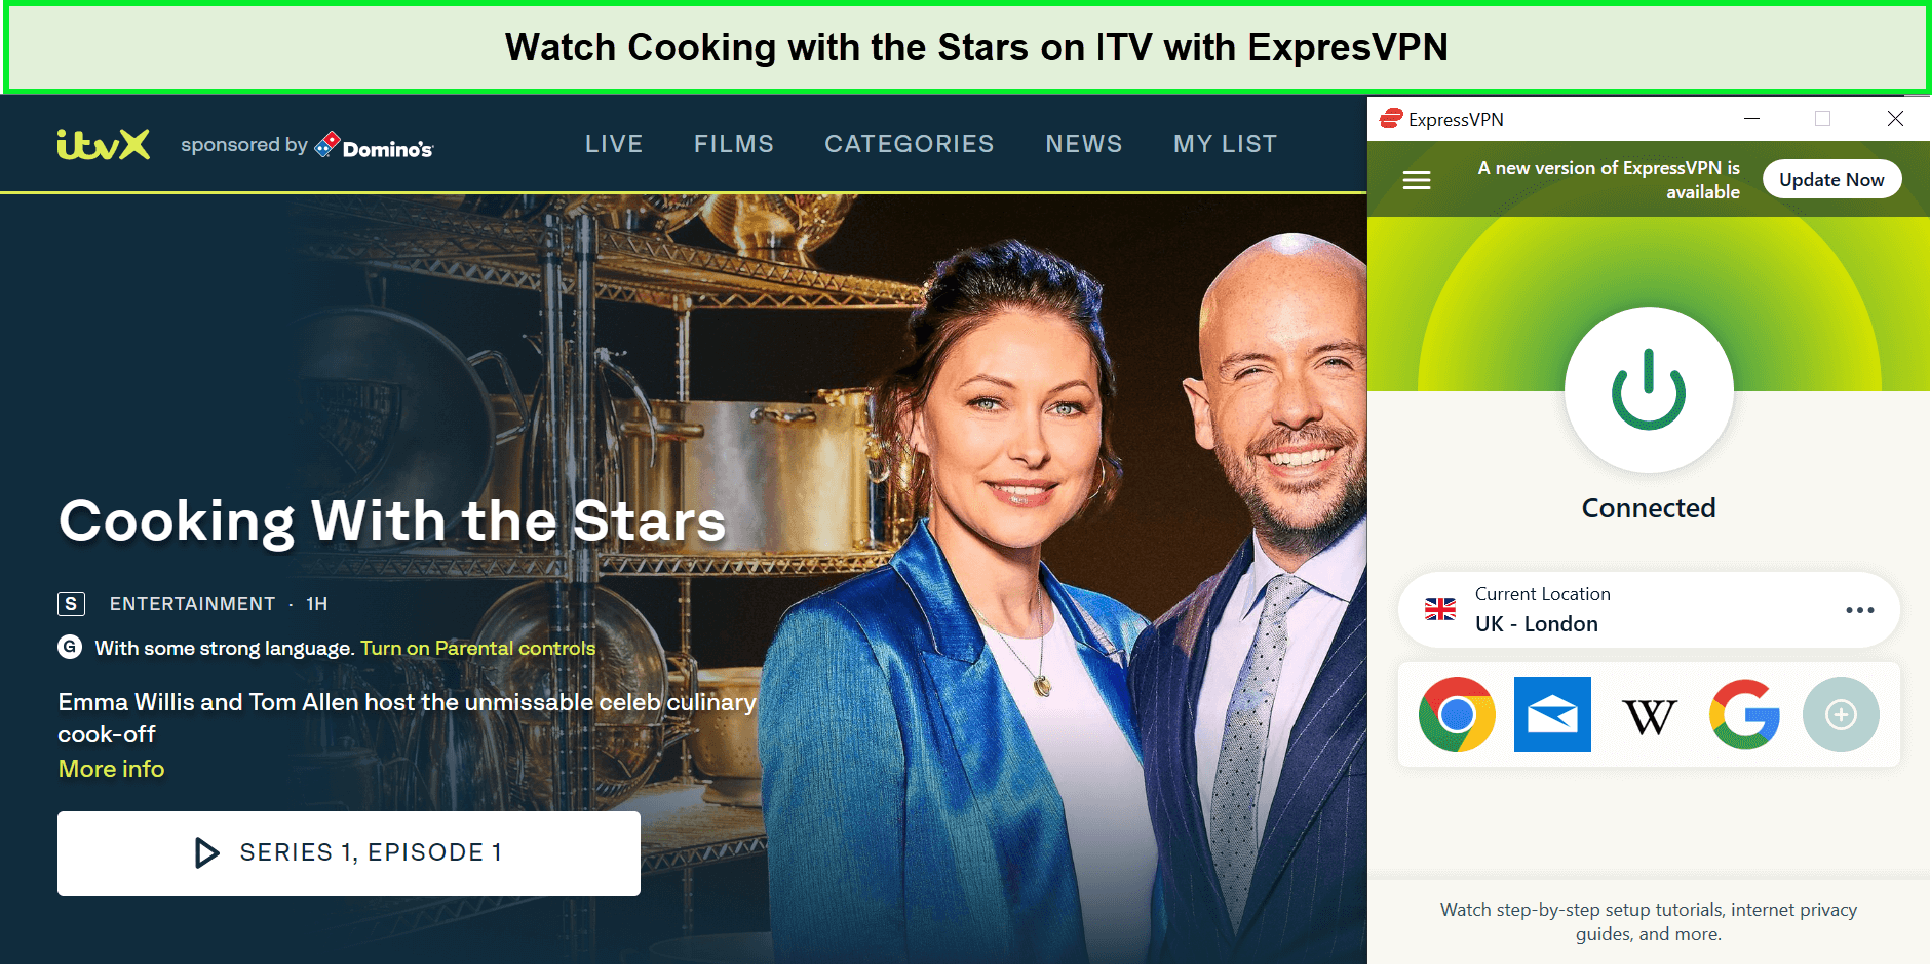 Watch-Cooking-with-the-Stars-Season-3-in-UAE-on-ITV-with-ExpresVPN